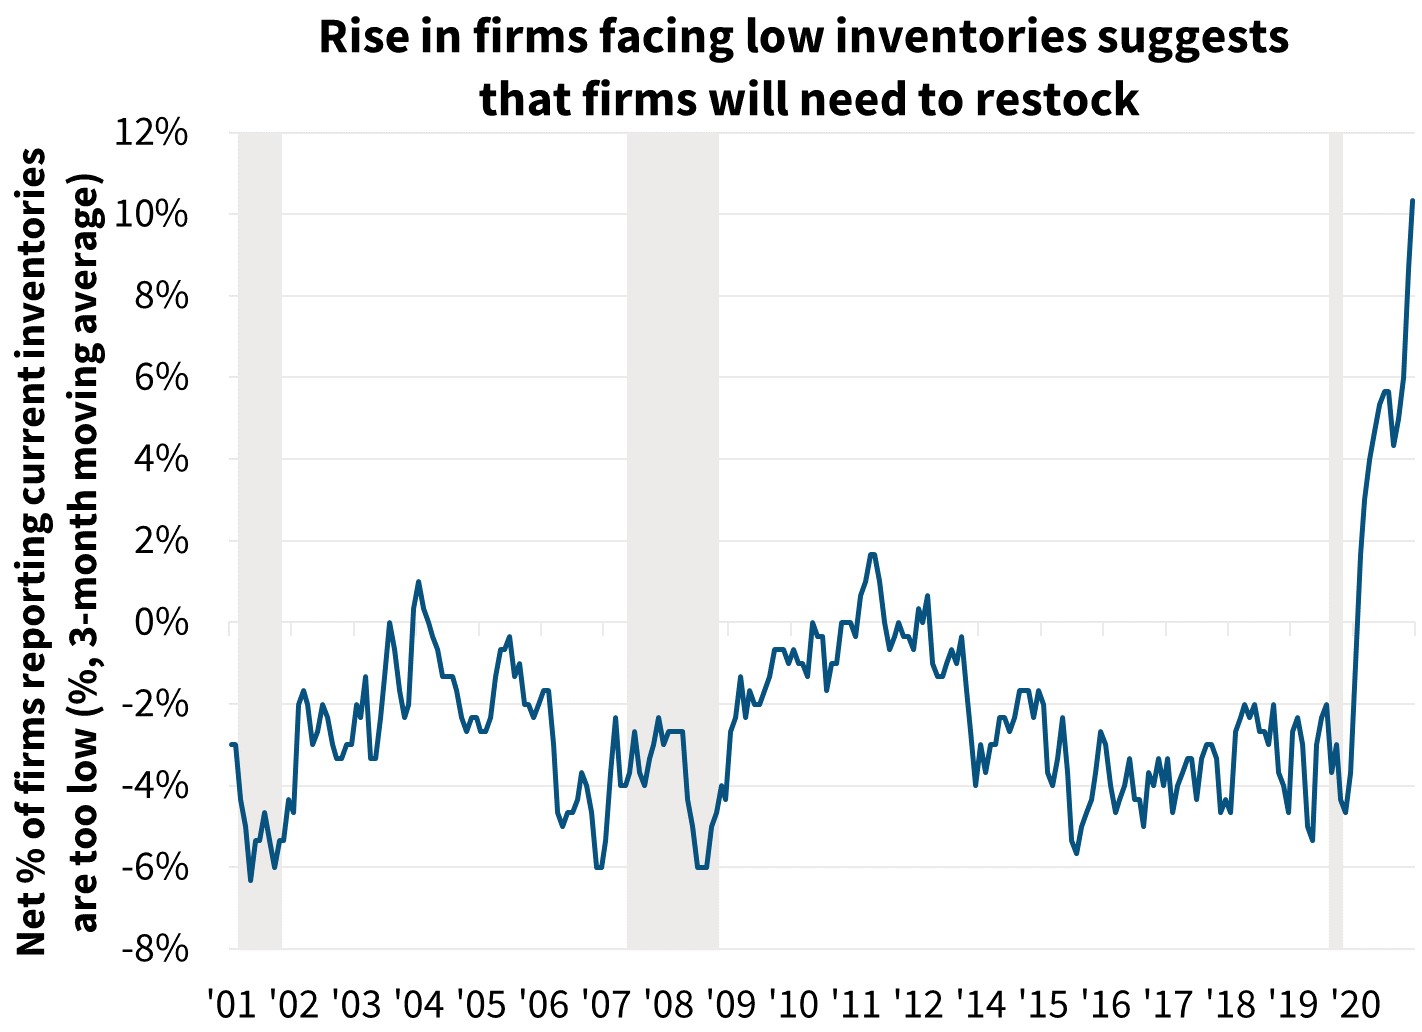  Rise in firms facing low inventories suggests that firms will need to restock
